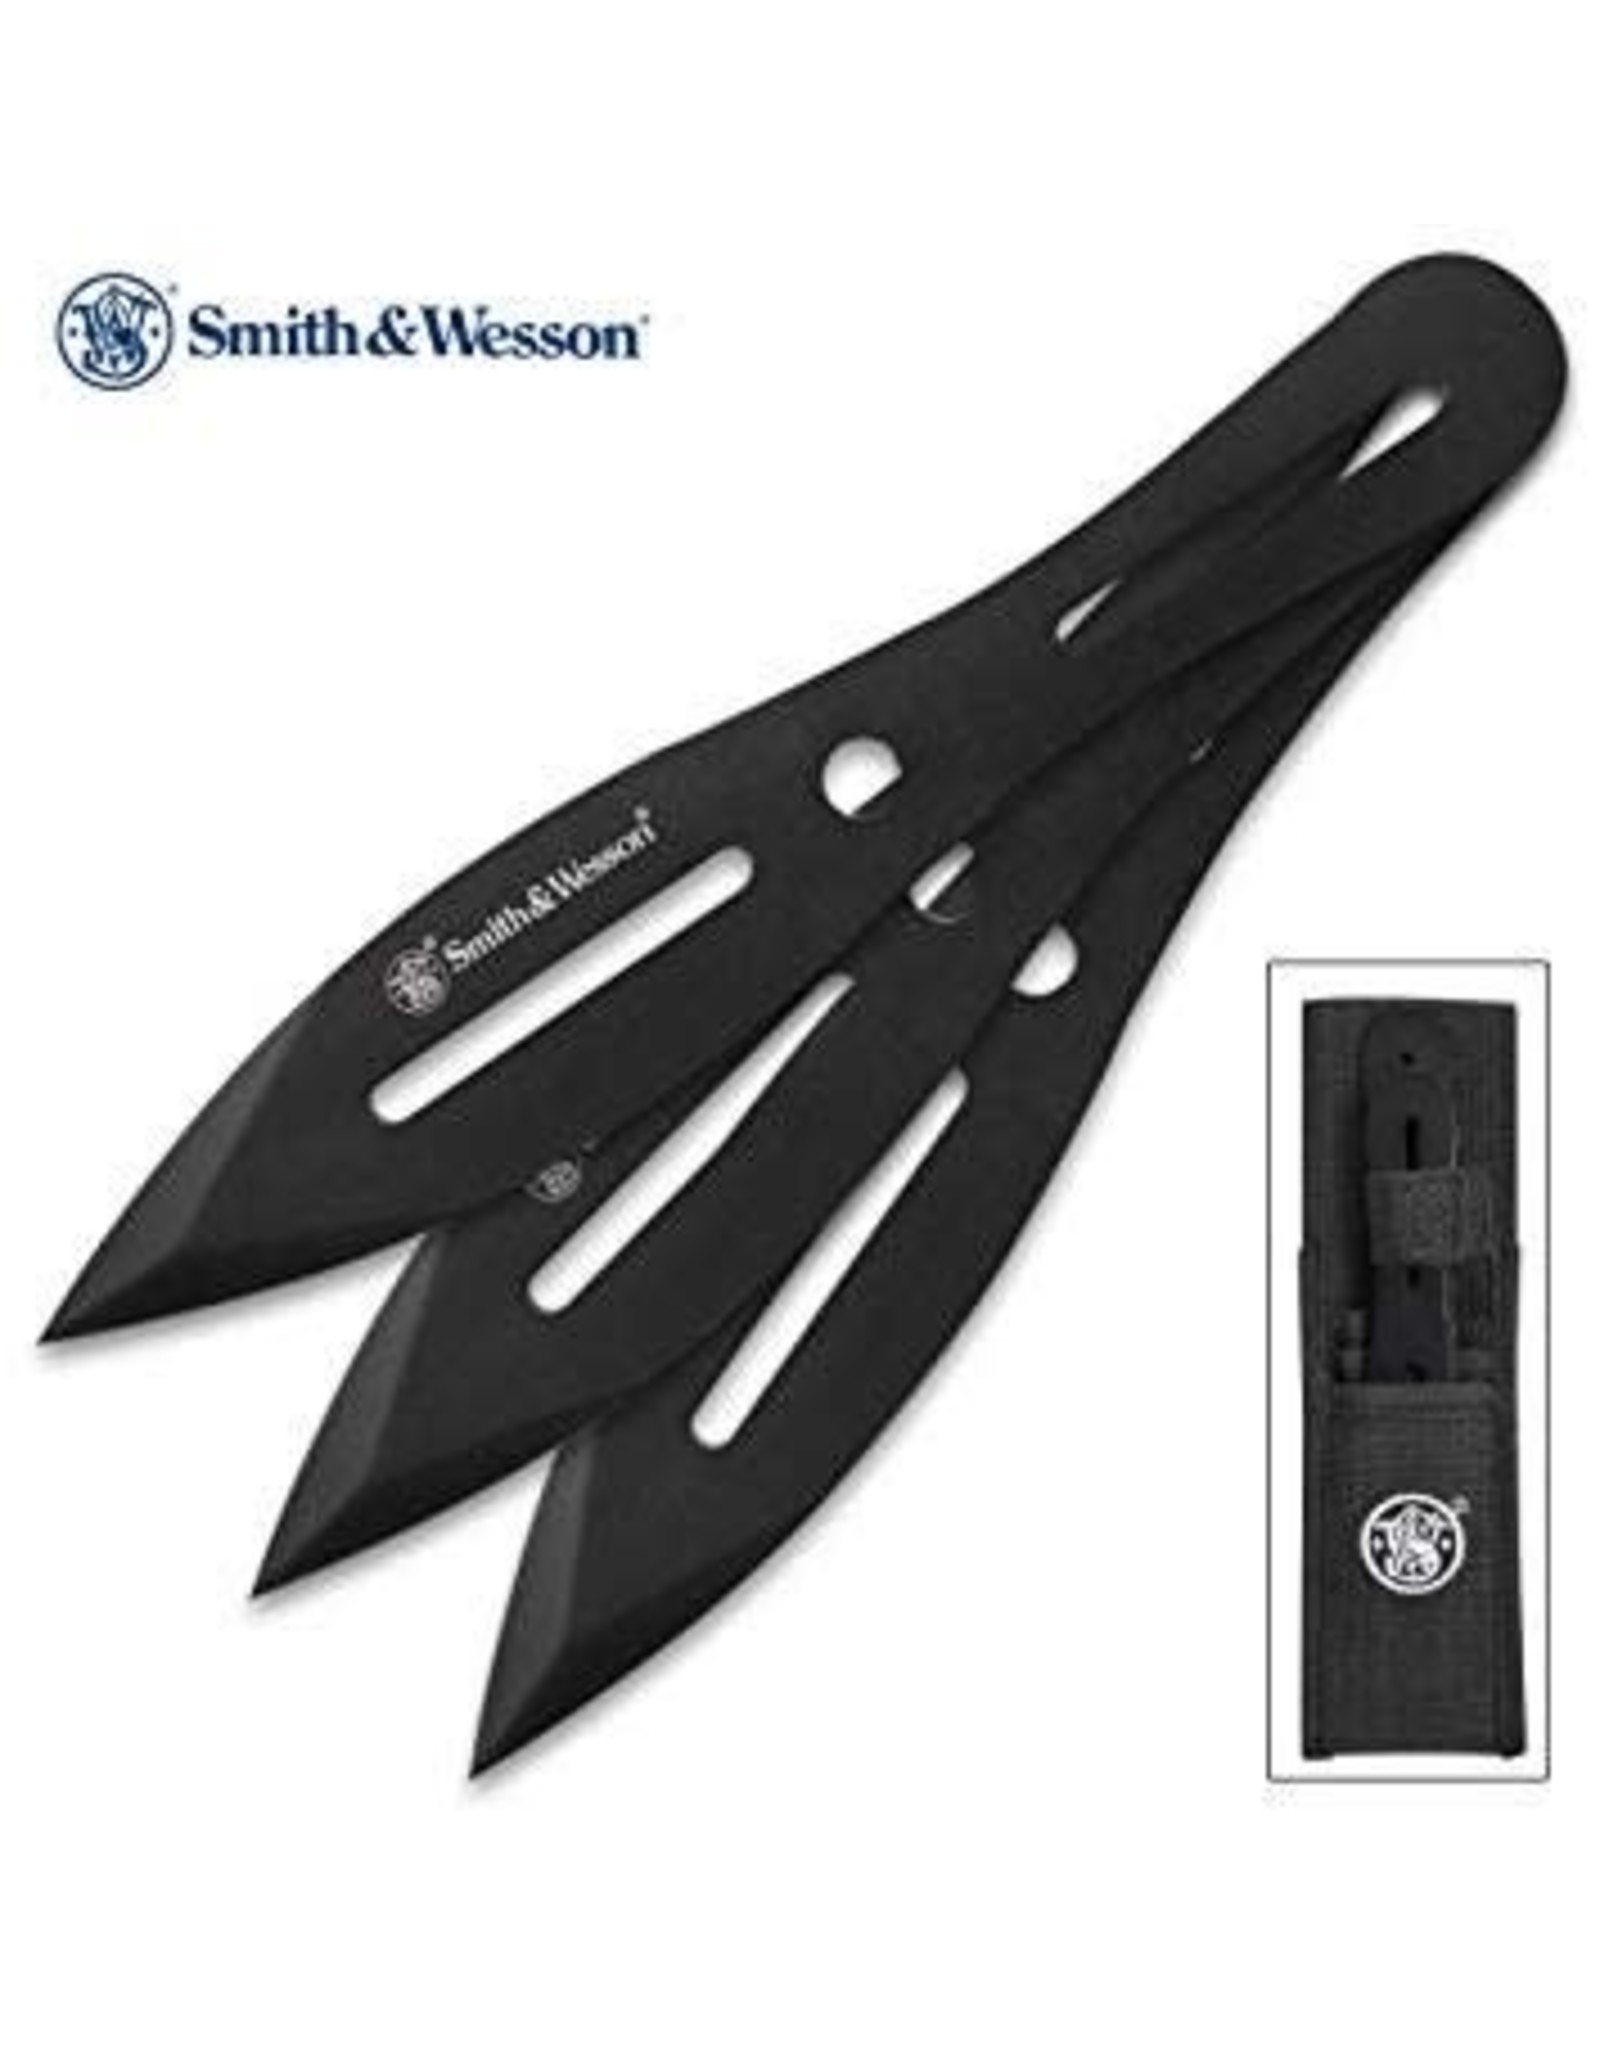 SMITH & WESSON SW PRO 8" STAINLESS BLACK THROWING KNIFE SET 3PK W/ SHTH